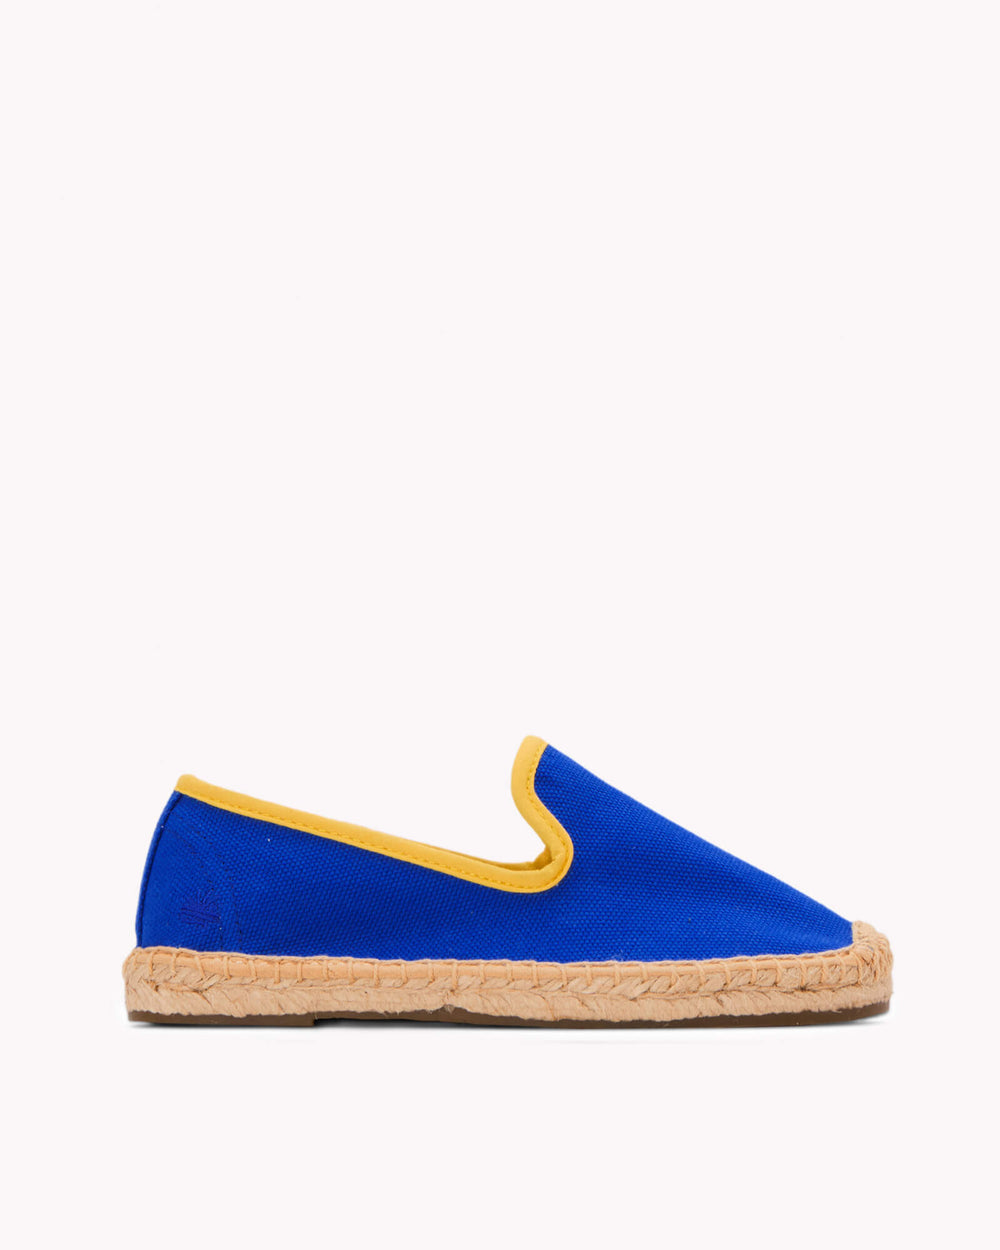 The Smoking Slipper - Contrast Piping - Blue / Yellow - Kids' - Kids' Espadrilles - Blue / Yellow - Soludos - 